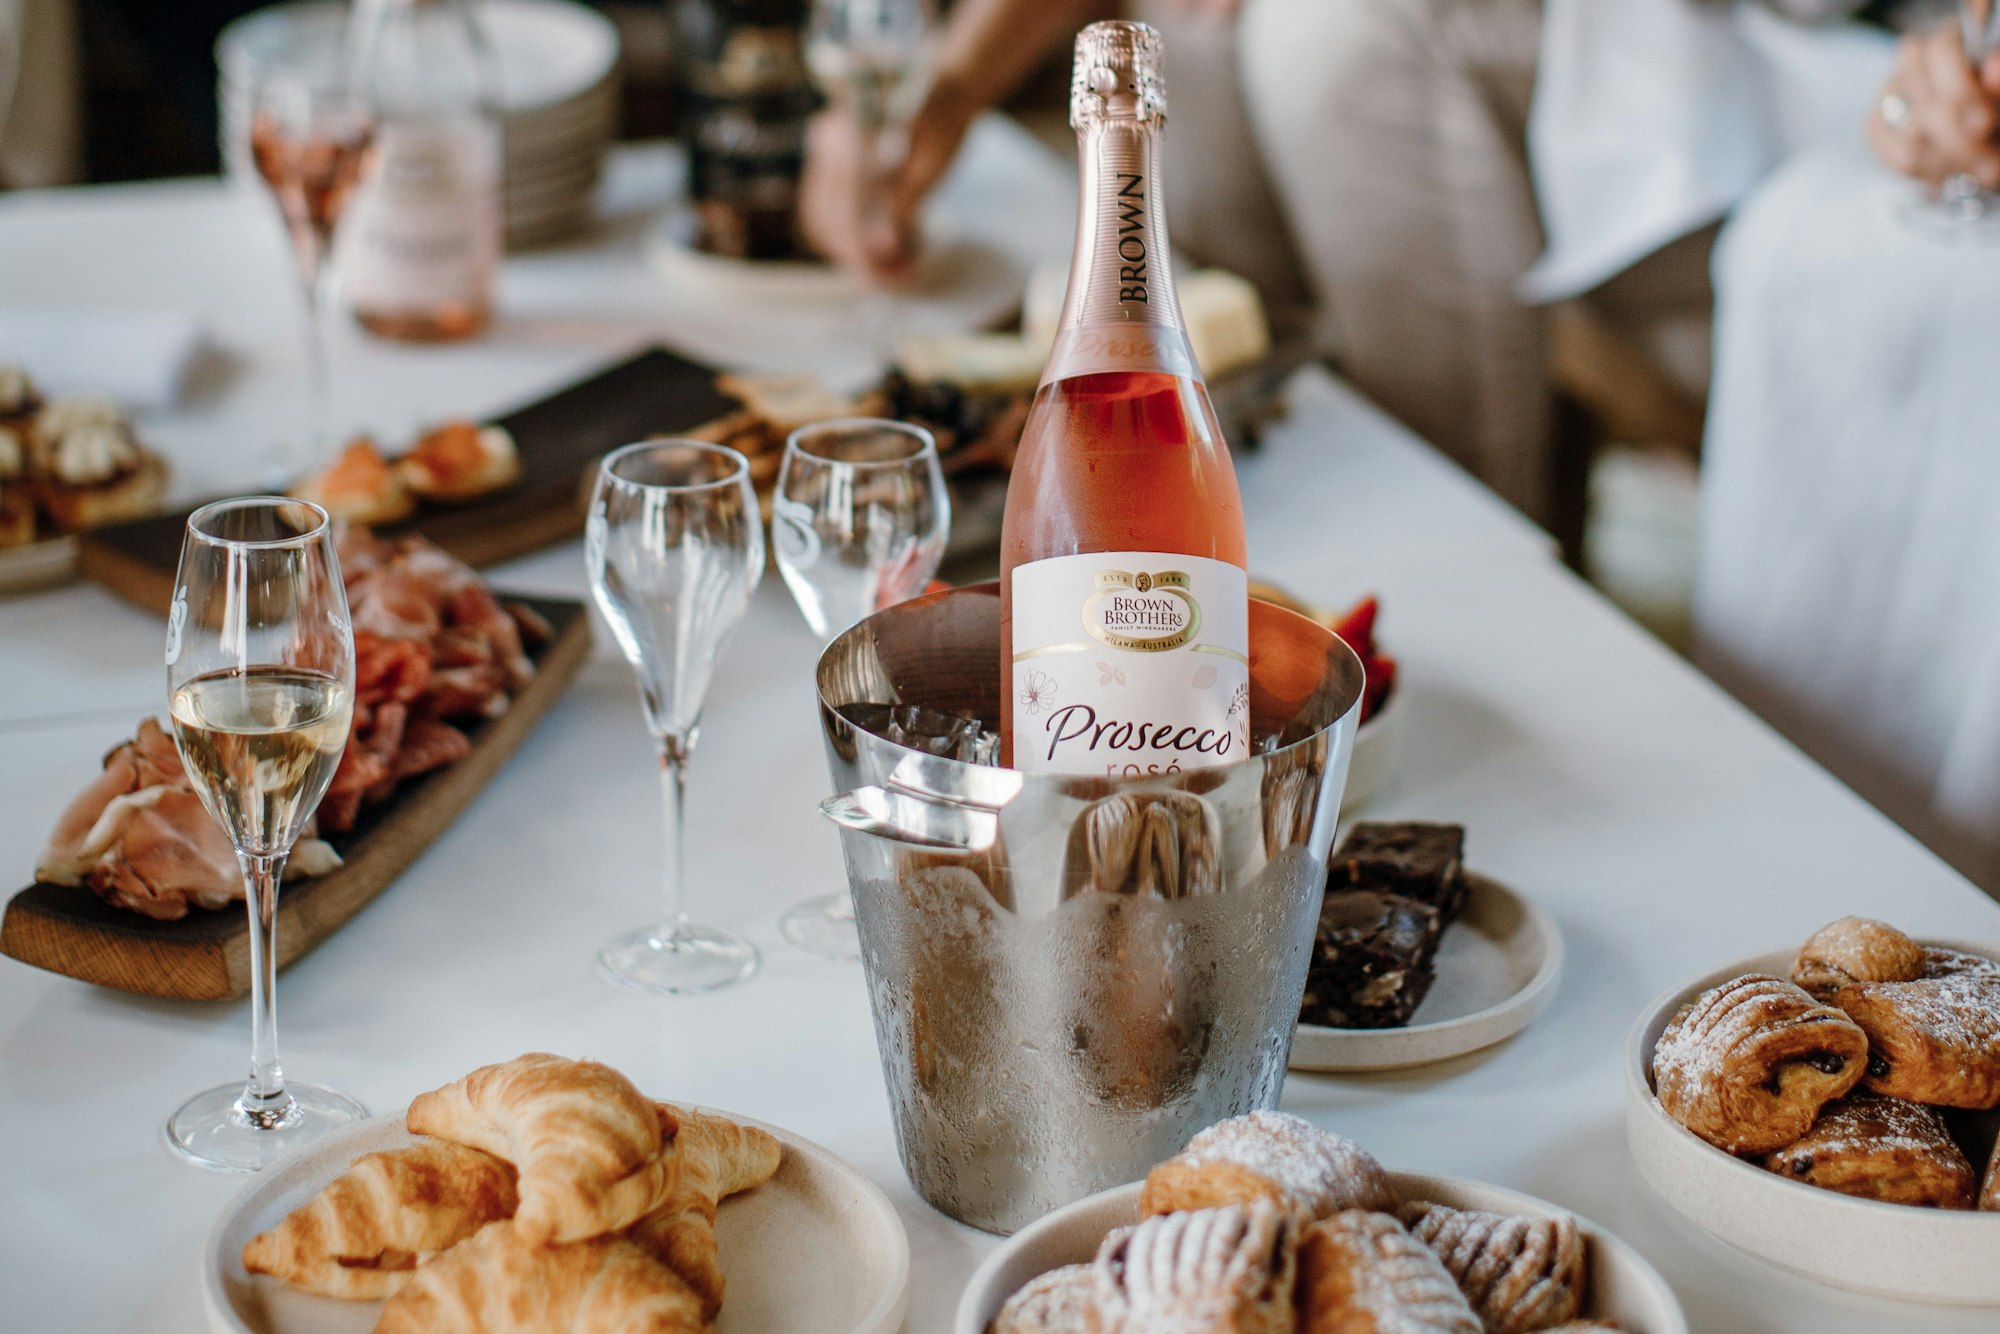 Brown Brothers Prosecco Rose among selection of sweets and pastries